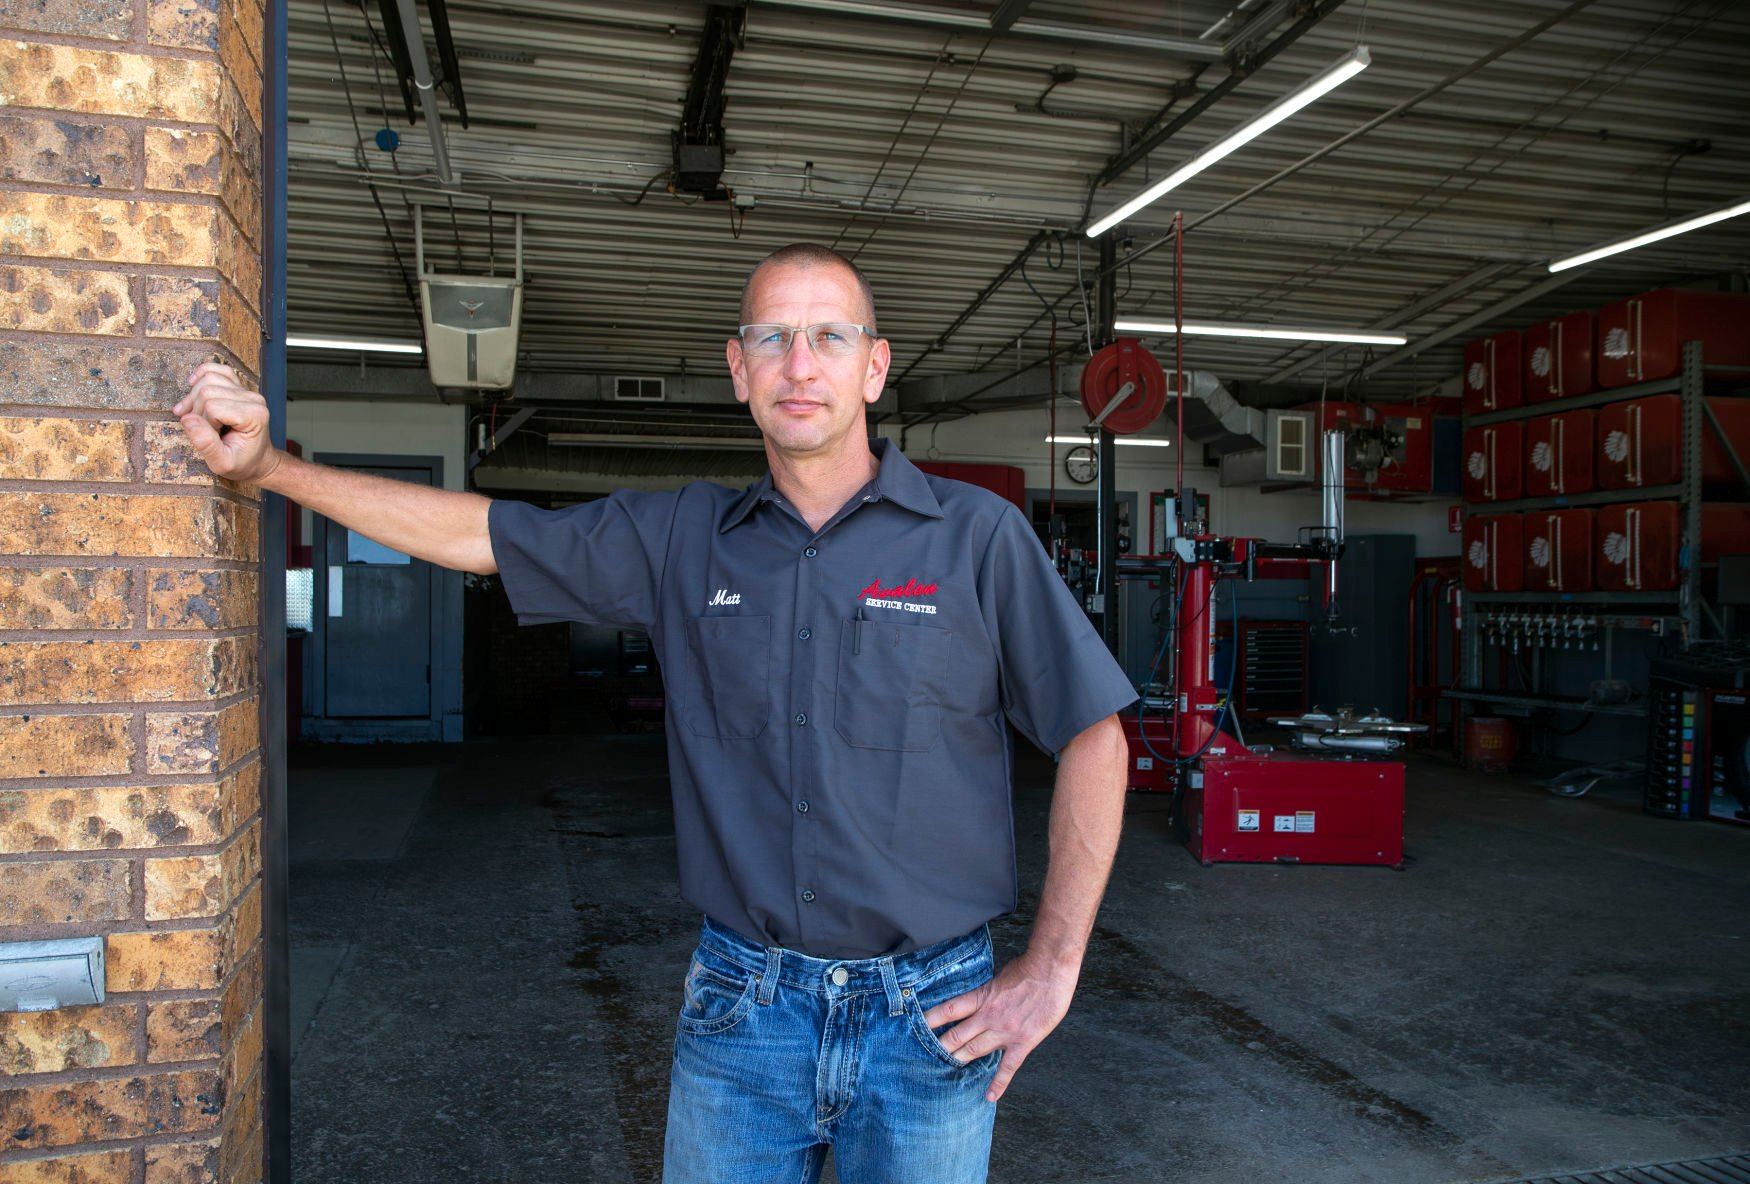 Co-owner Matt Leibfried looks forward to continuing the family business at Avalon Service Center in Rickardsville, Iowa.    PHOTO CREDIT: Stephen Gassman